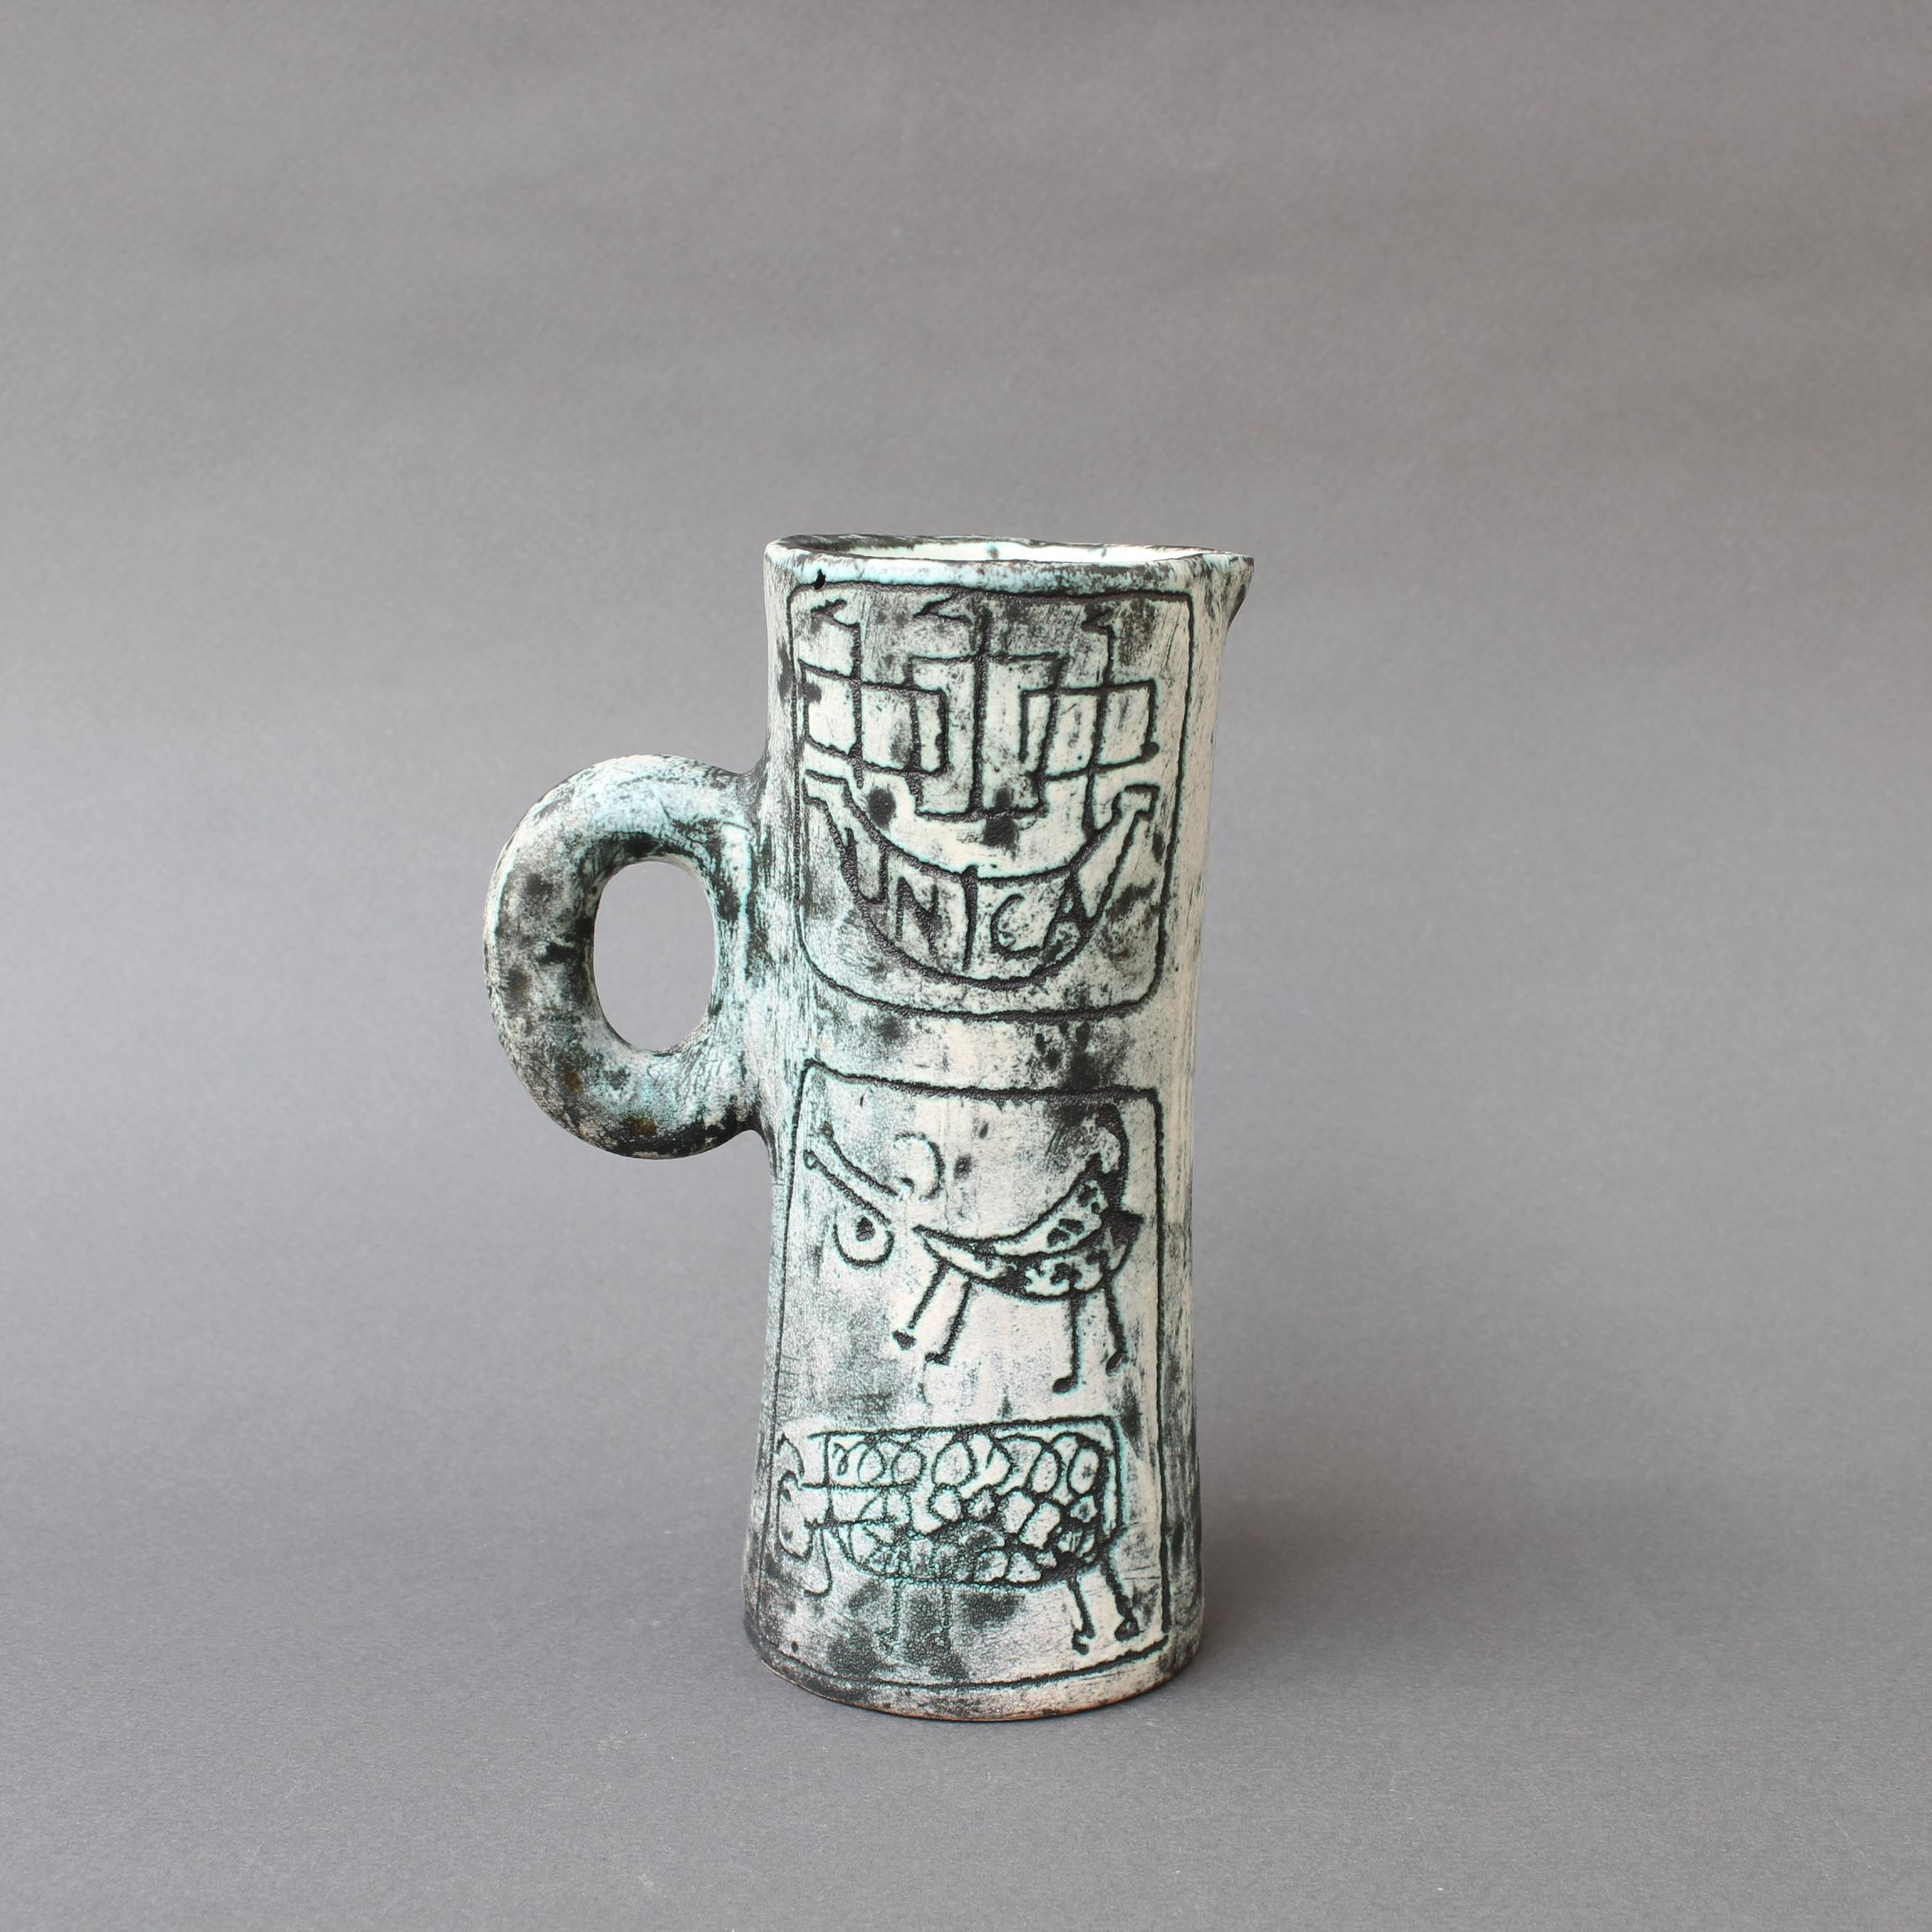 Midcentury Ceramic Decorative Pitcher by Jacques Blin, circa 1950s, Small 1